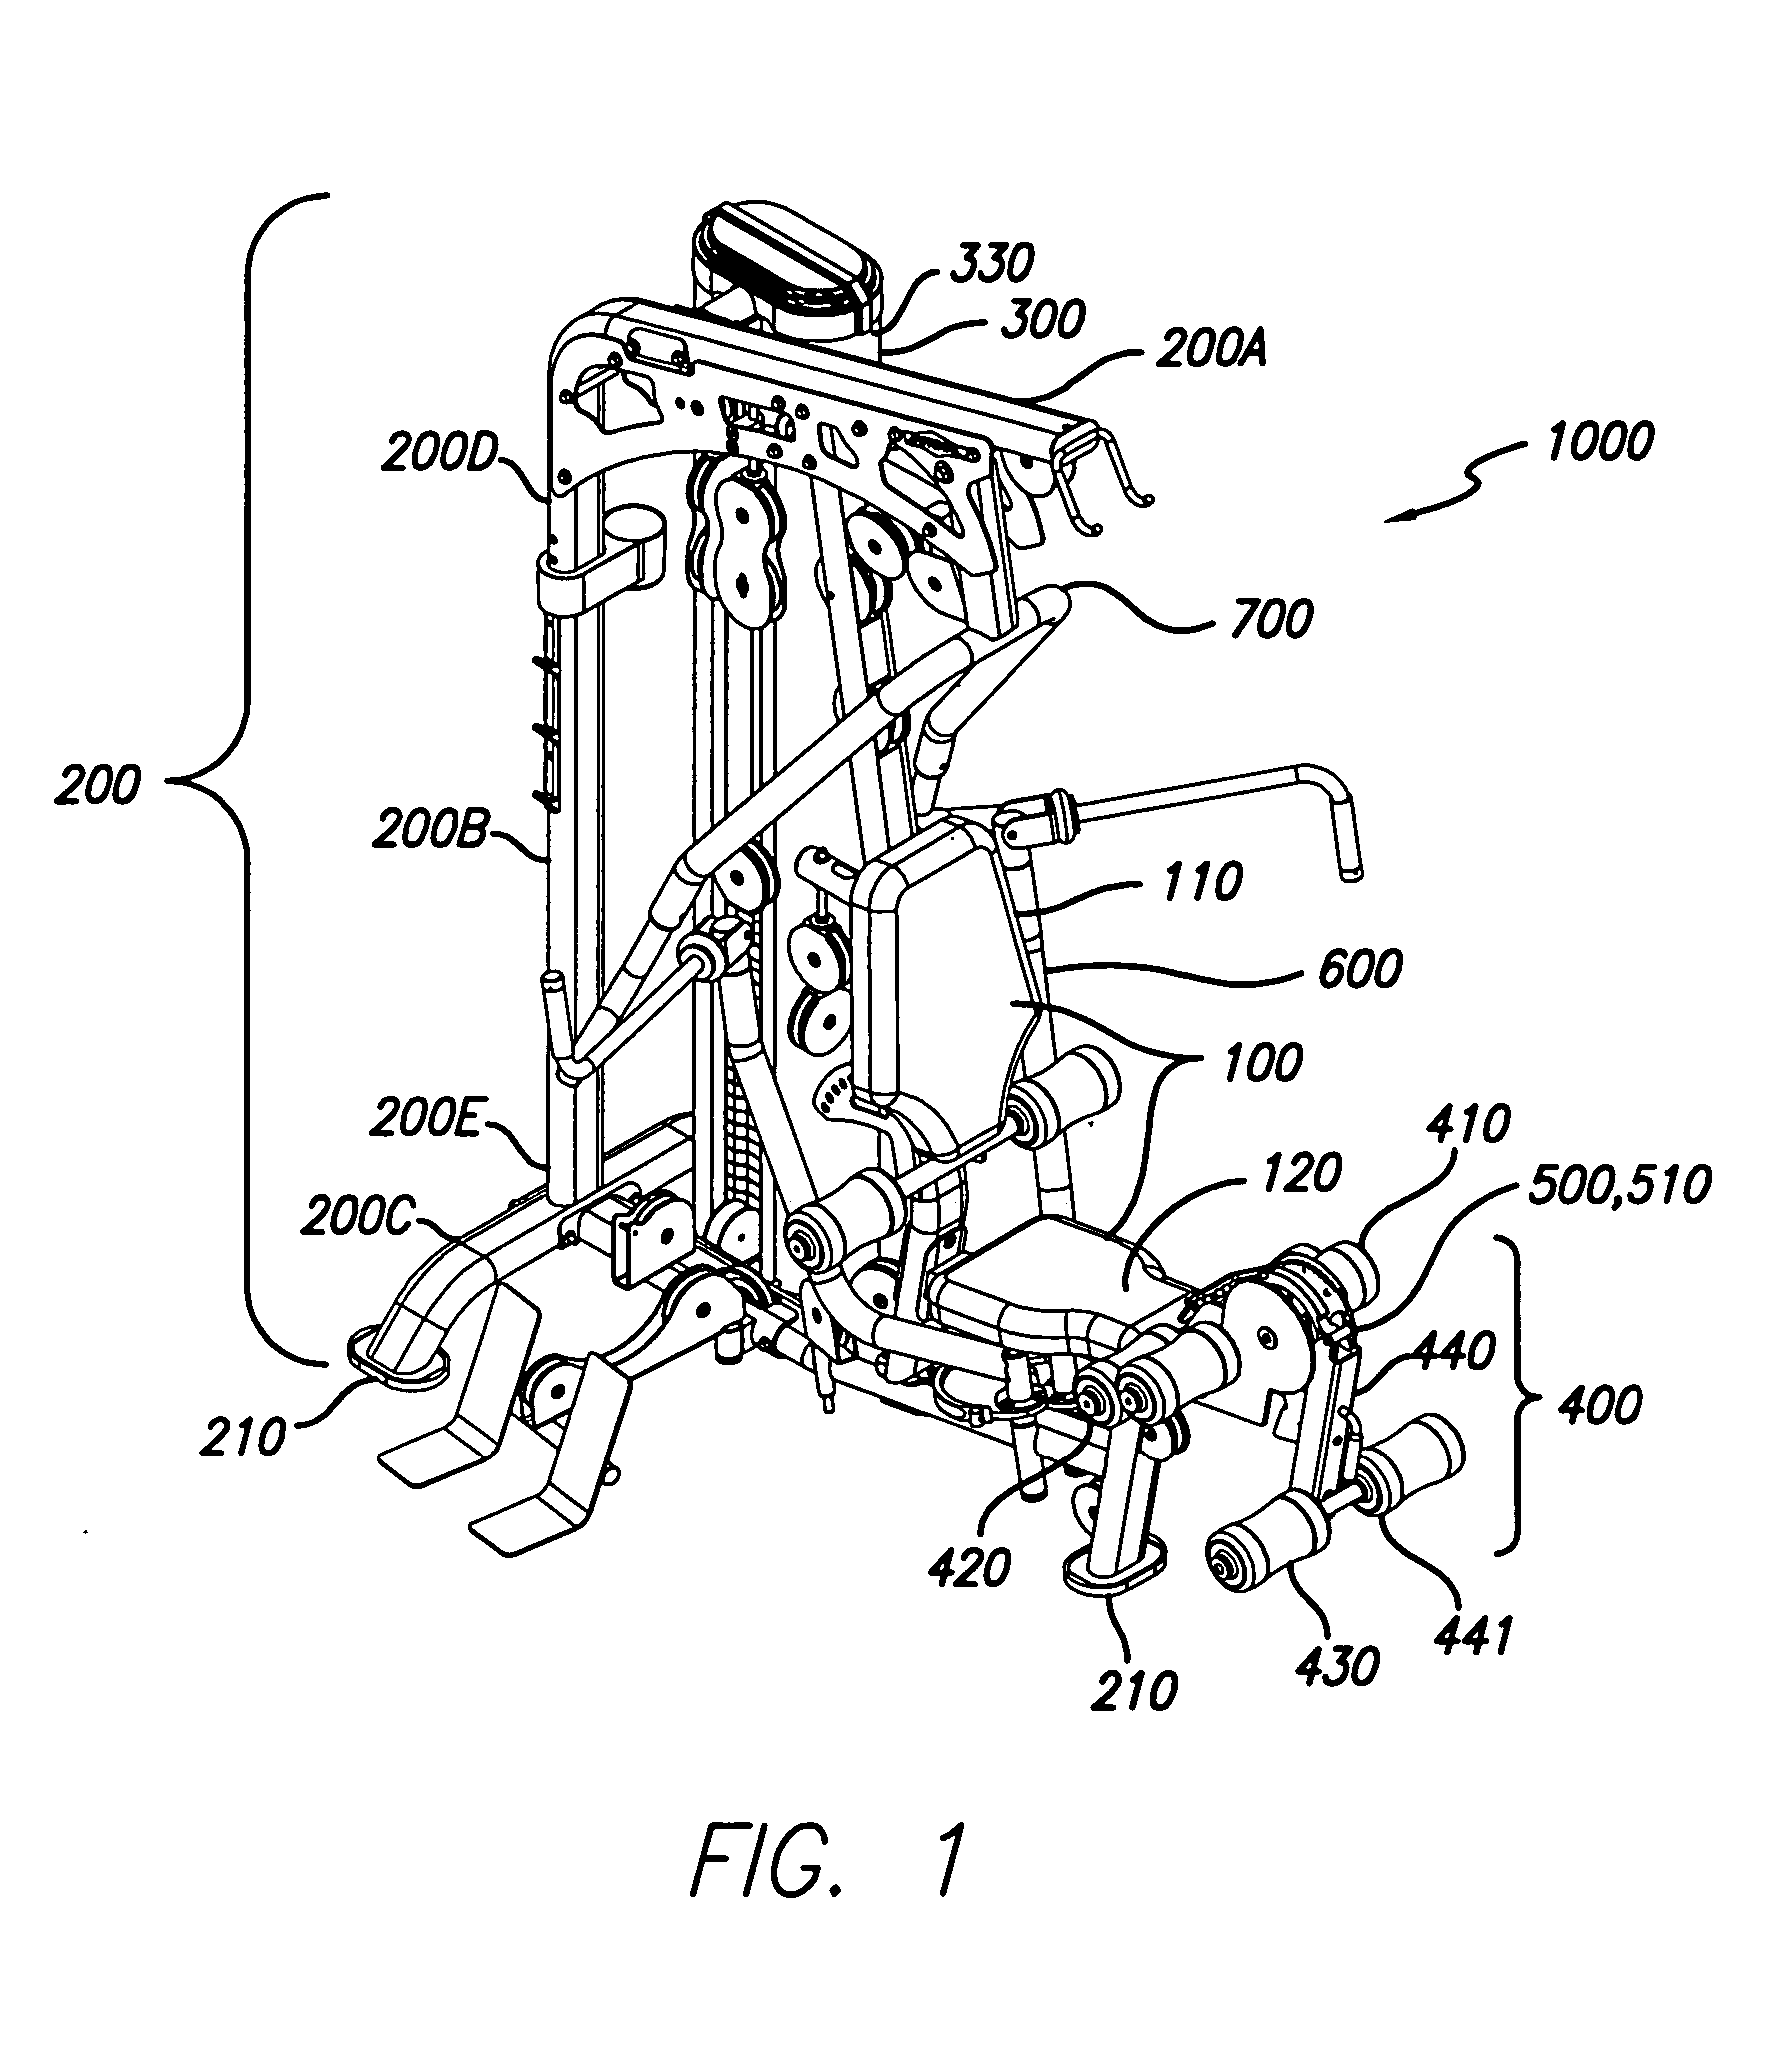 Leg exercise apparatus and method with gravity latch device